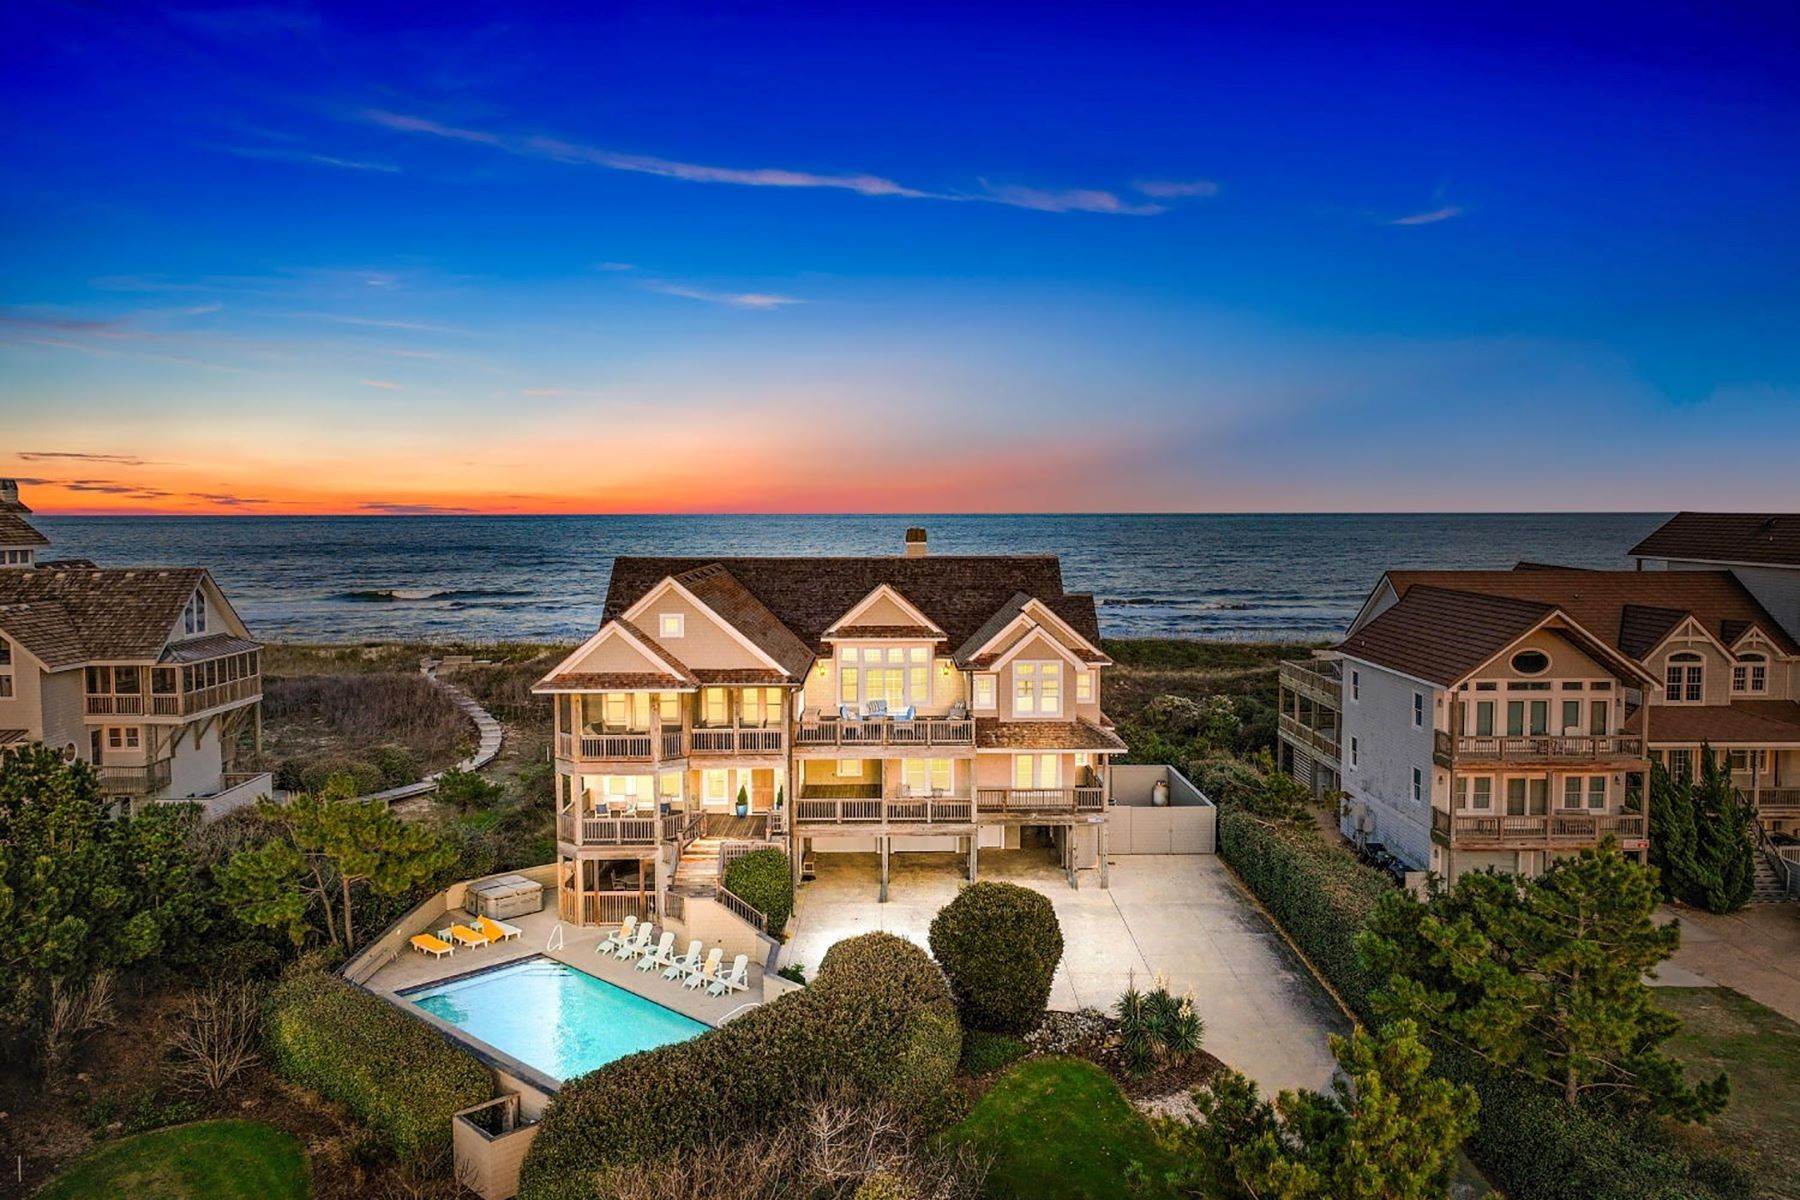 Single Family Homes for Sale at Spectacular Palmer's Island Oceanfront Estate 112 S Baum Trail Duck, North Carolina 27949 United States